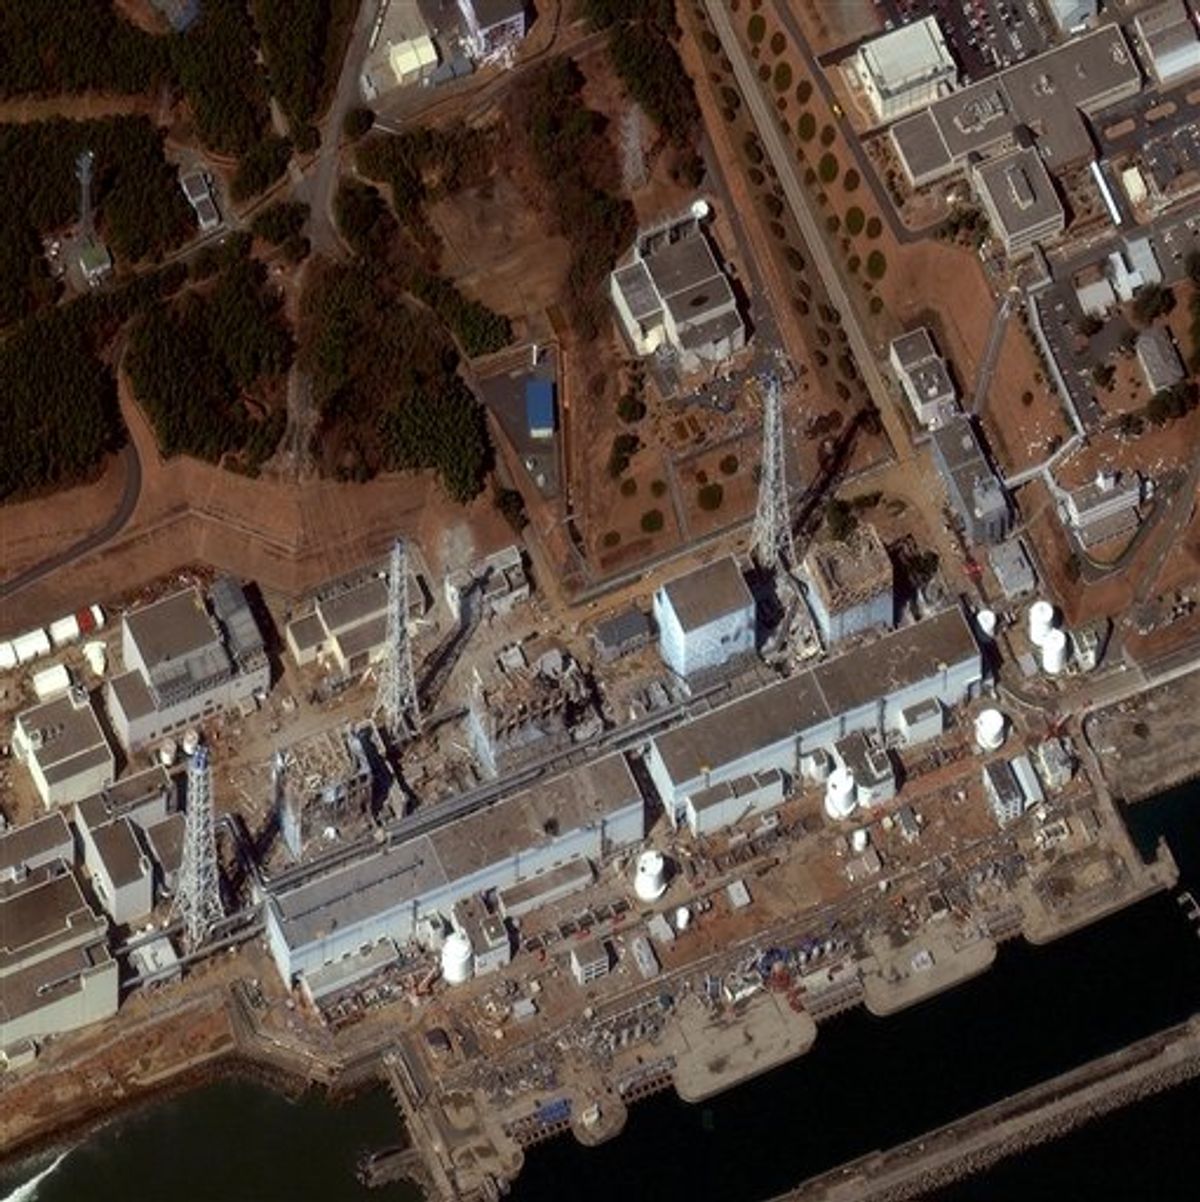 In this Friday, March 18, 2011 satellite image released by DigitalGlobe, the Fukushima Dai-ichi is shown.  Sirens wailed Friday along a devastated coastline to mark exactly one week since an earthquake and tsunami triggered a nuclear emergency, and the government acknowledged it was slow to respond to the disasters that the prime minister called a "great test for the Japanese people." The admission came as Japan welcomed U.S. help in stabilizing its overheated, radiation-leaking Fukushima Dai-ichi nuclear complex and raised the accident level for the crisis, putting it on a par with the 1979 Three Mile Island accident in Pennsylvania. (AP Photo/DigitalGlobe) NO SALES (AP)